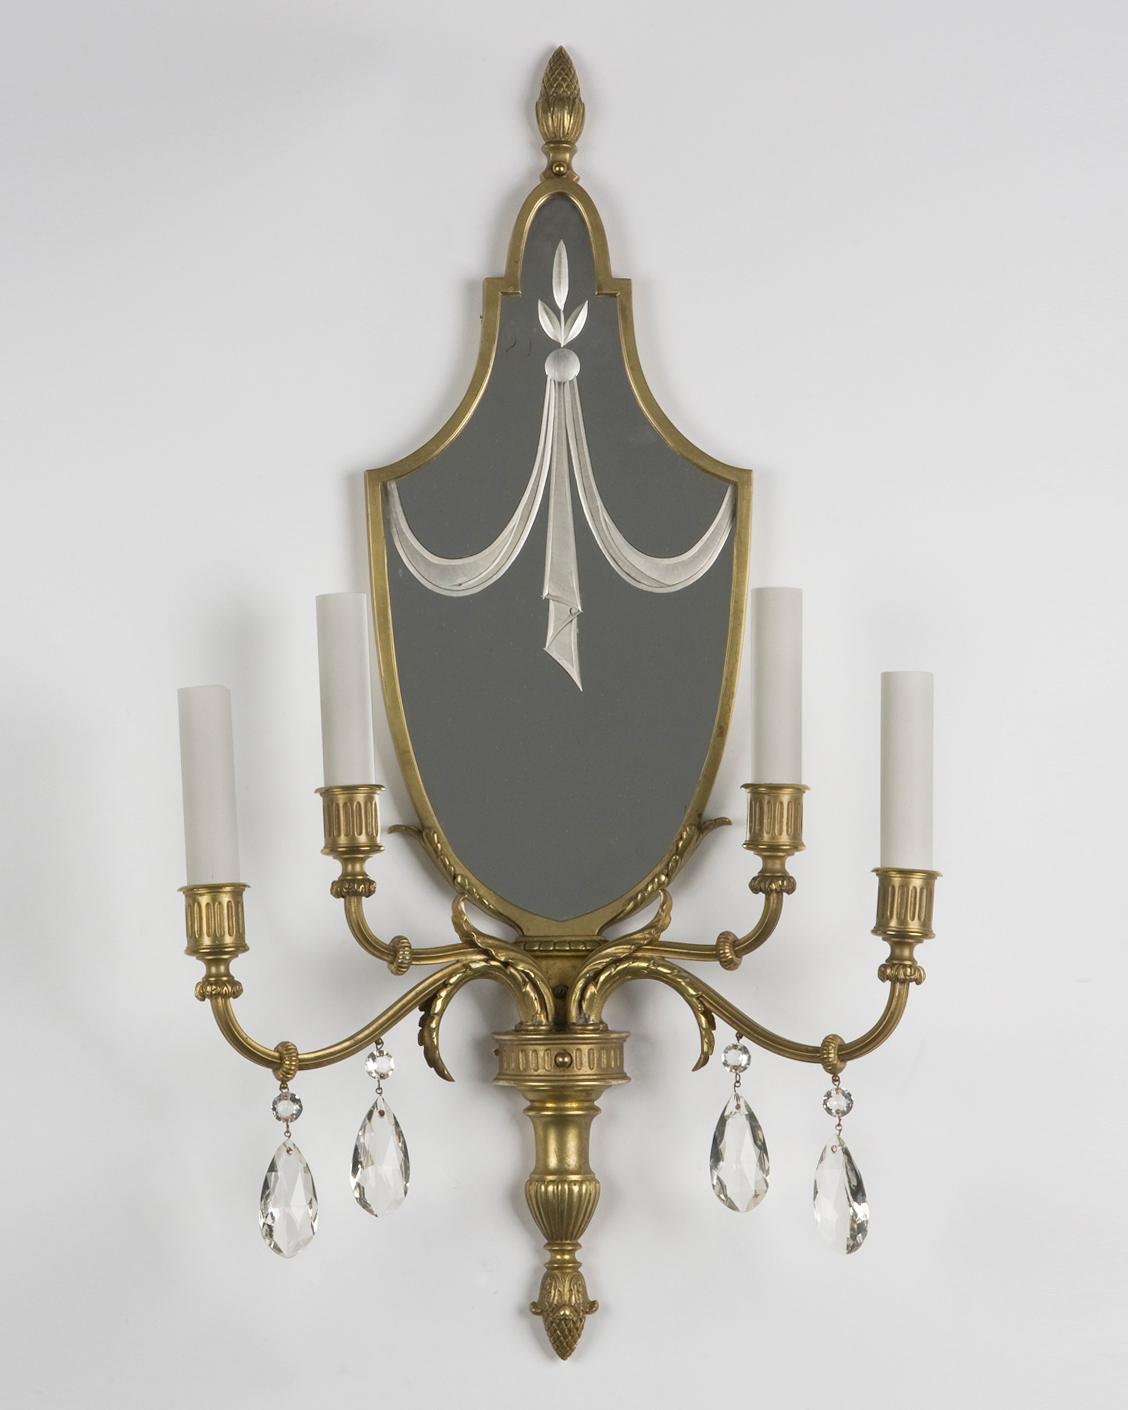 AIS1880
A pair of antique four arm sconces in old warm brass, with wheel-cut mirrored backplates. The arms dressed with faceted crystal prisms. From the Henry Ford Museum in Dearborn, Michigan.

Dimensions:
Overall: 27-1/2